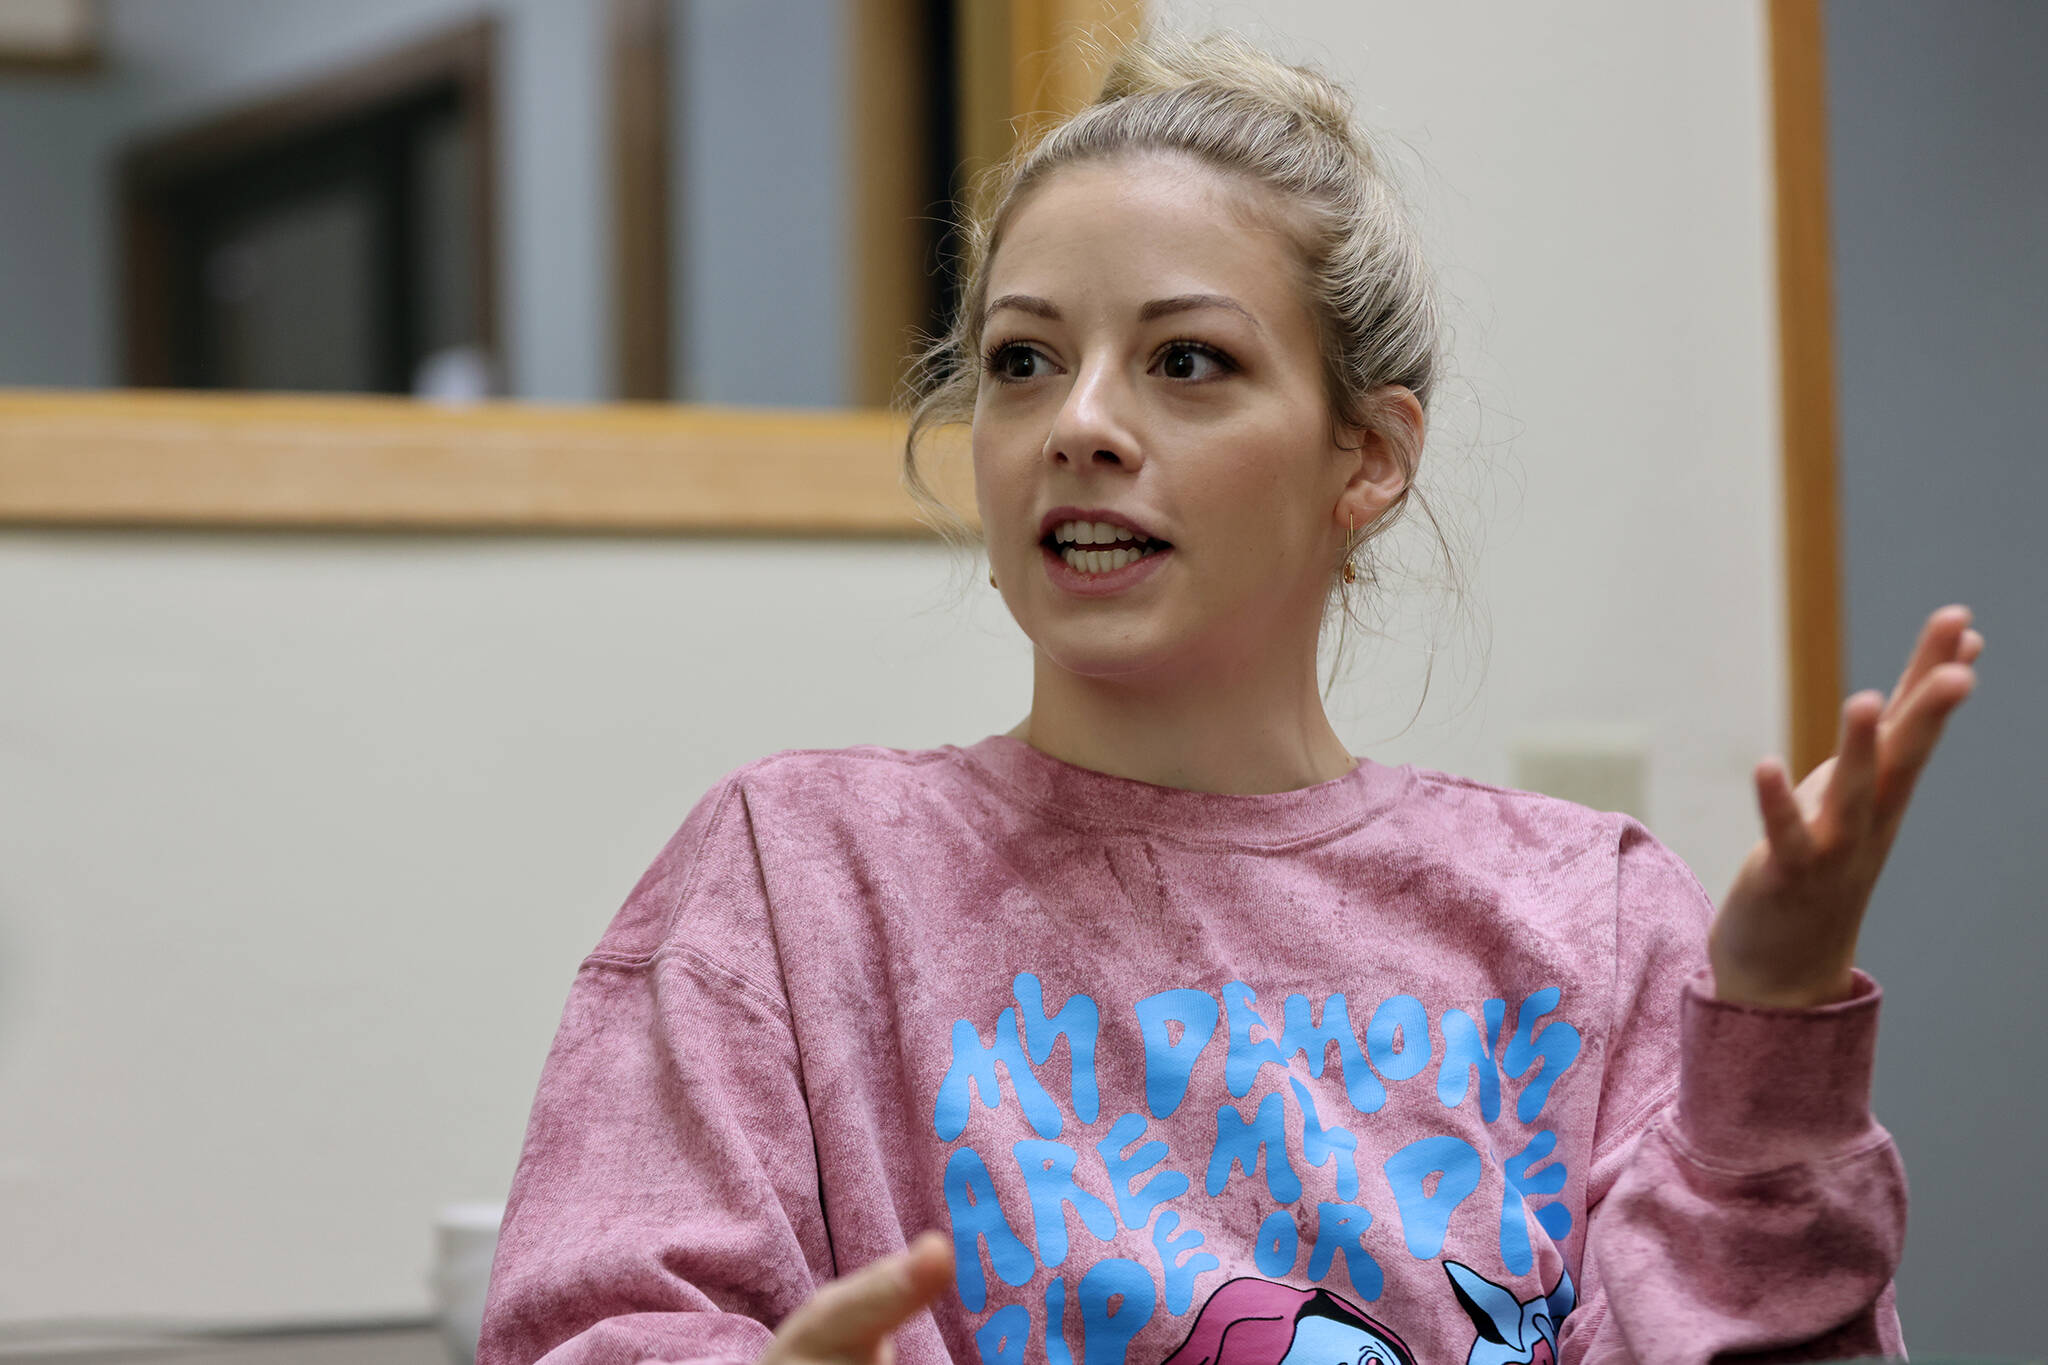 Gracie Gold will be answering questions and giving a free talk for Juneau area students and their families that will address the challenges she’s faced as an international competitor at such a young age. (Ben Hohenstatt / Juneau Empire)